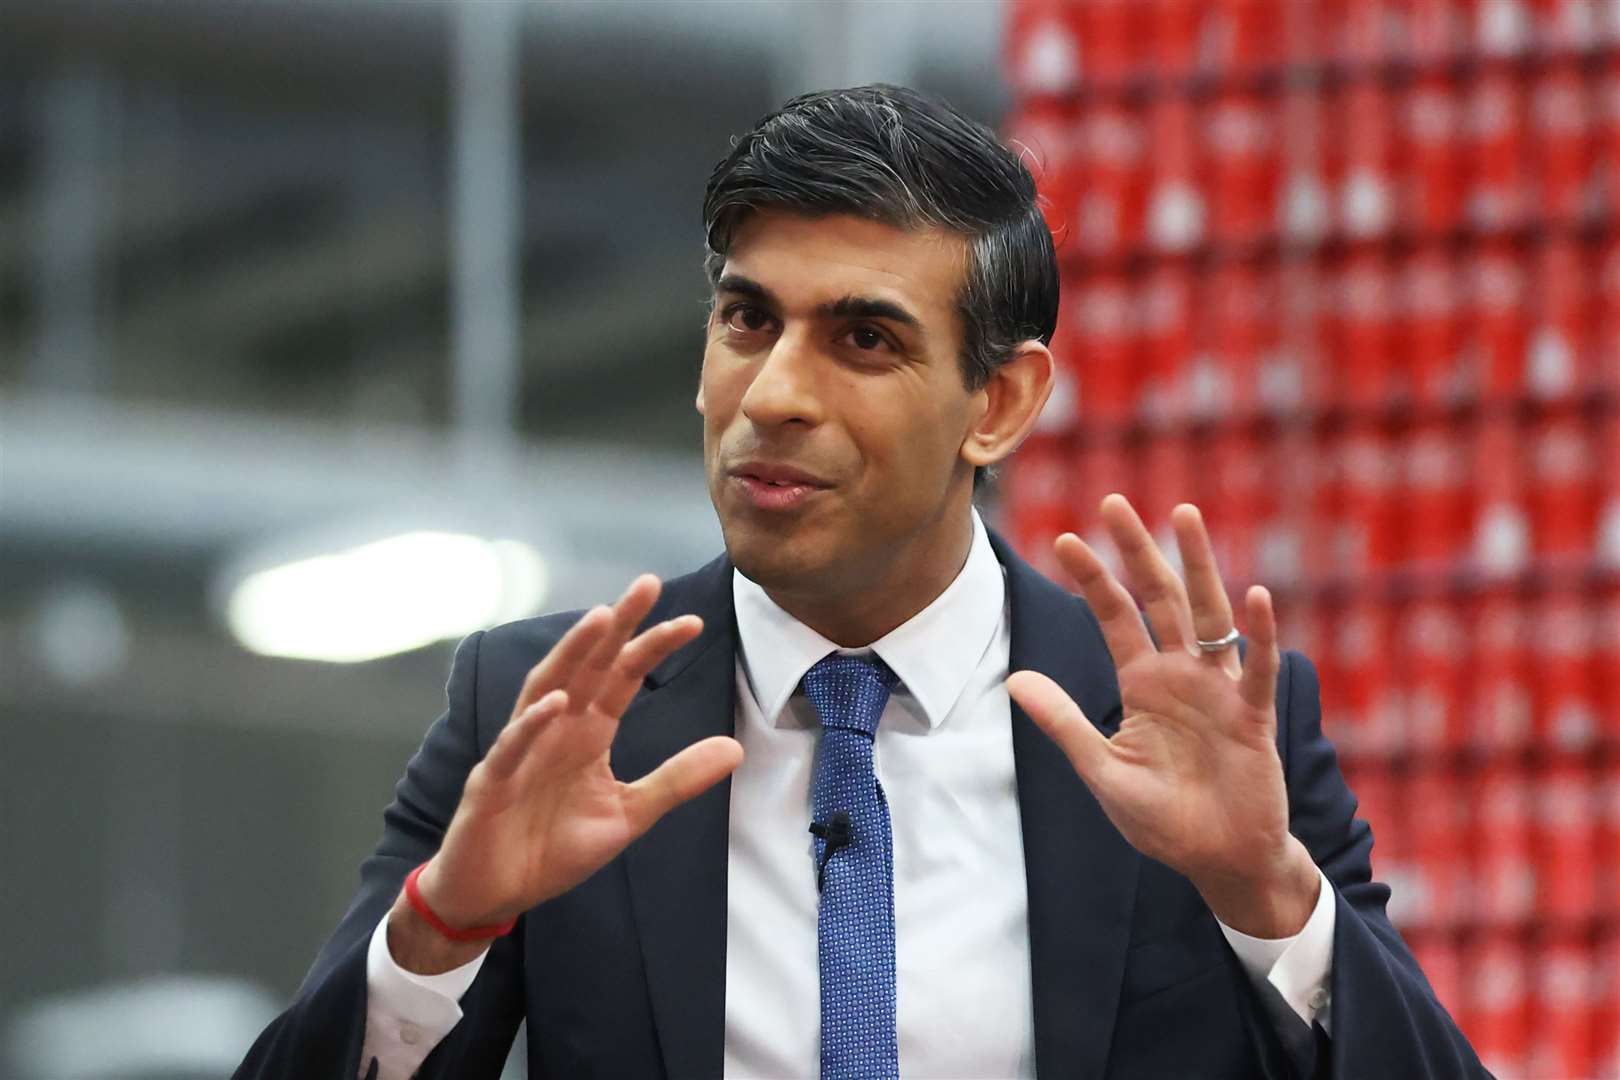 Prime Minister Rishi Sunak holds a Q&A session with local business leaders during a visit to Coca-Cola HBC in Lisburn (Liam McBurney/PA)